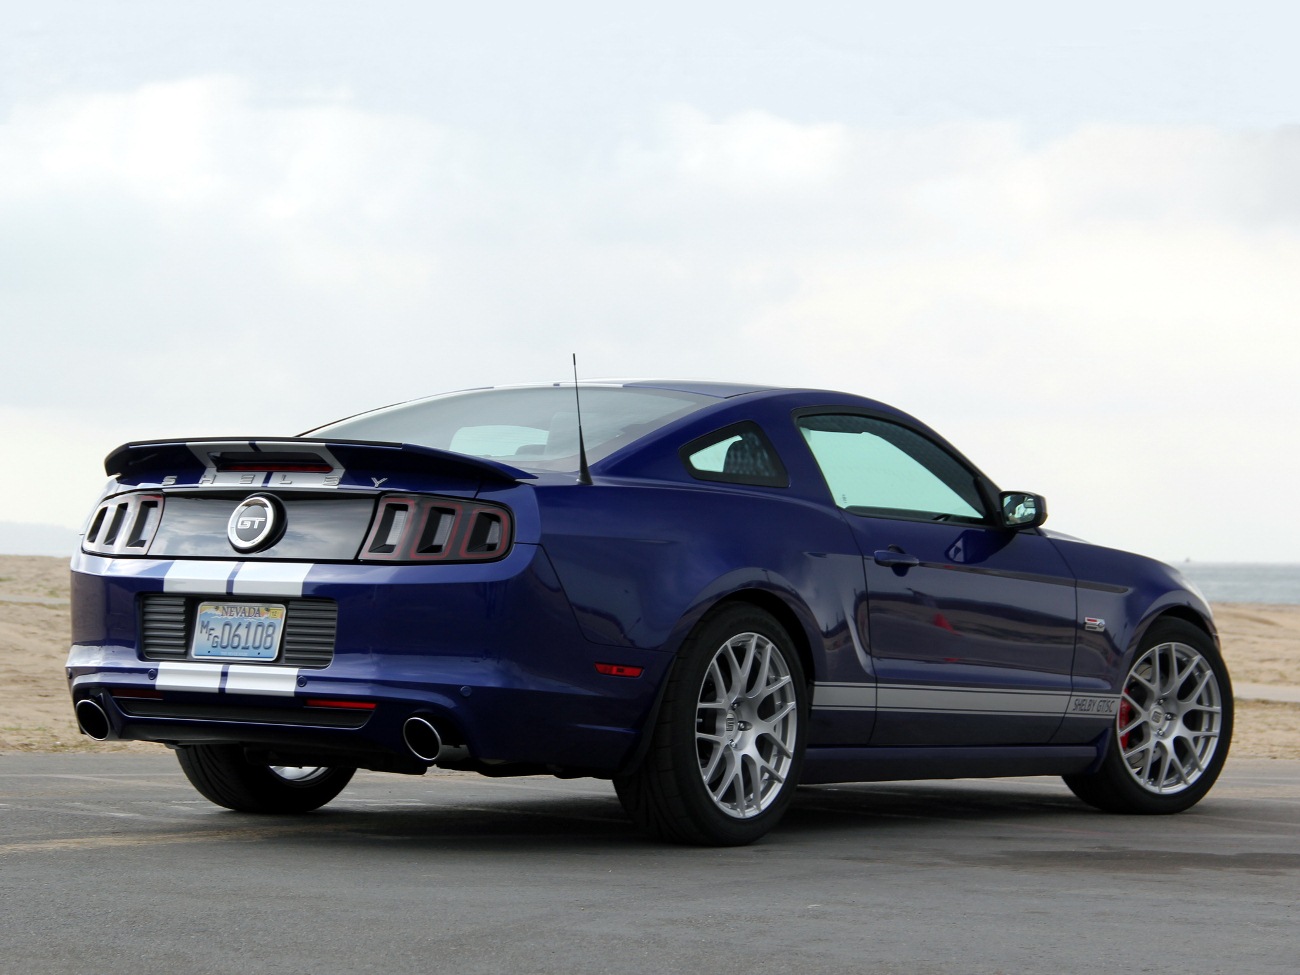 Ford Mustang Shelby Gt Wallpaper Photos Of